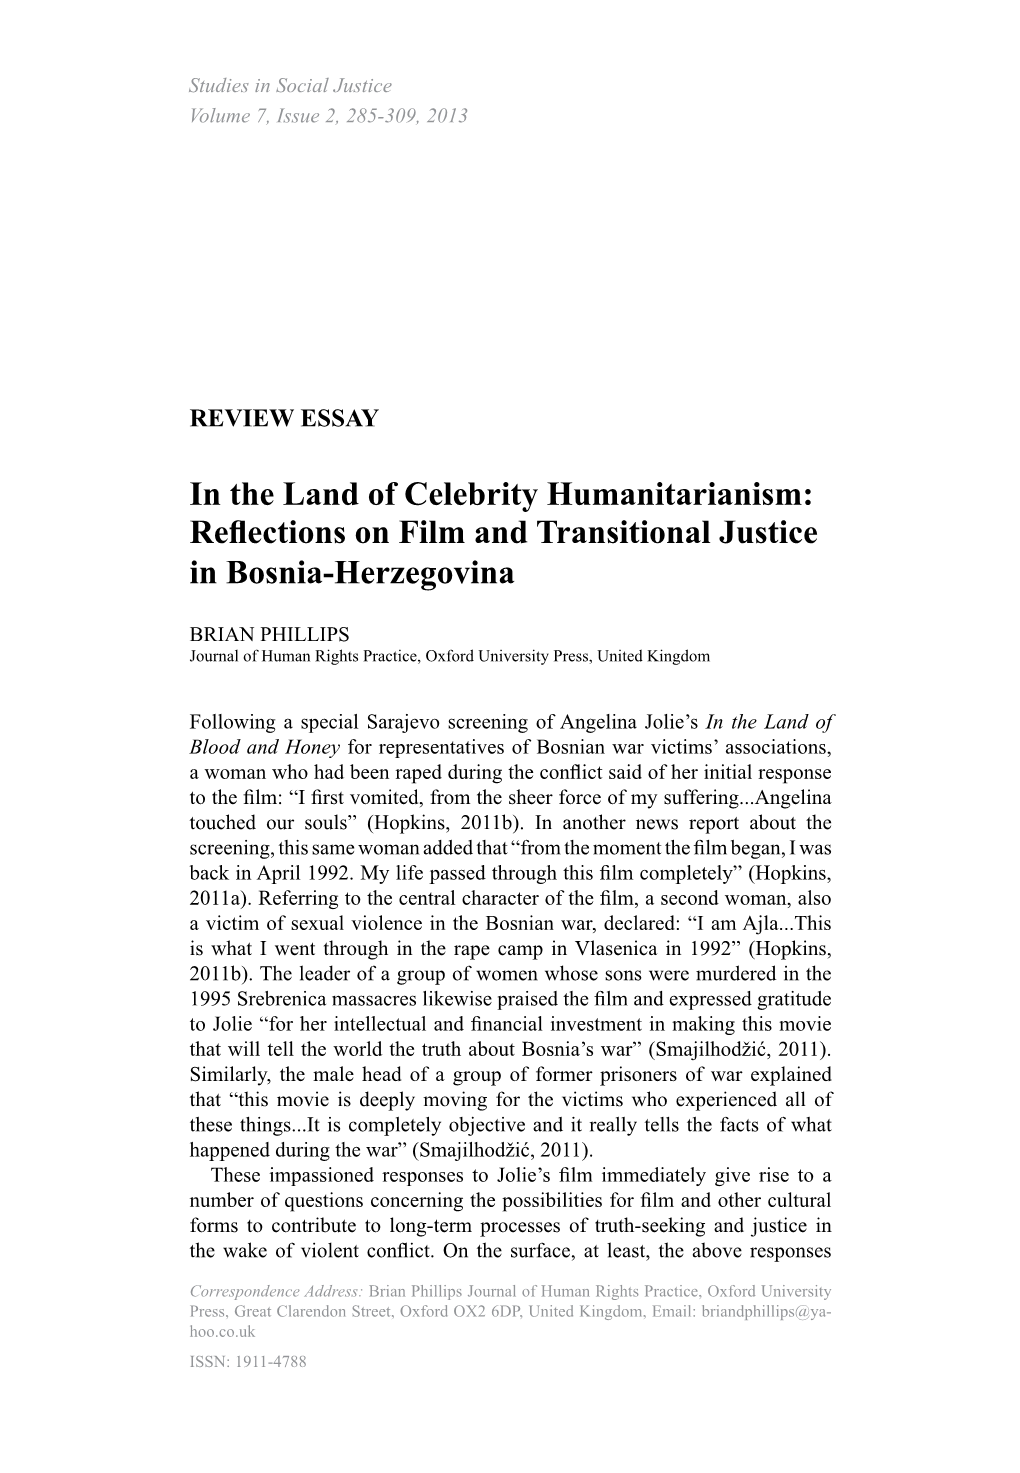 Reflections on Film and Transitional Justice in Bosnia-Herzegovina